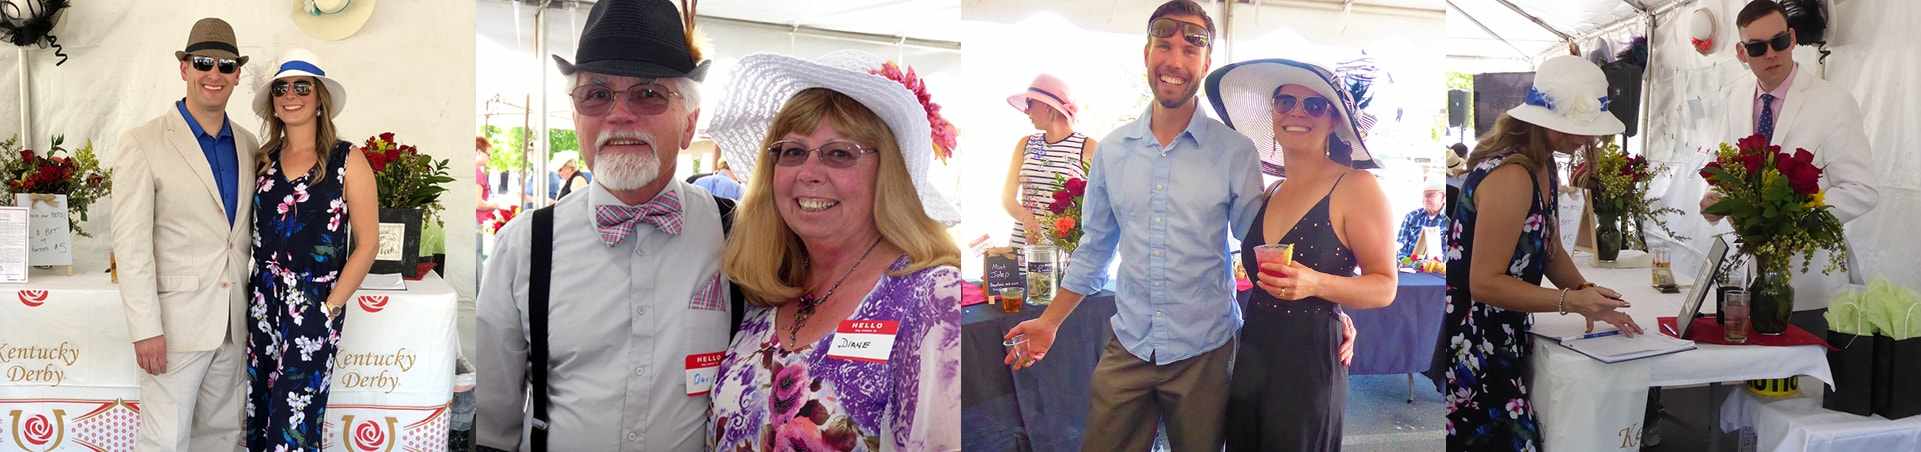 A collage of photos showing Distinctive Dental Care's Annual Kentucky Derby Party